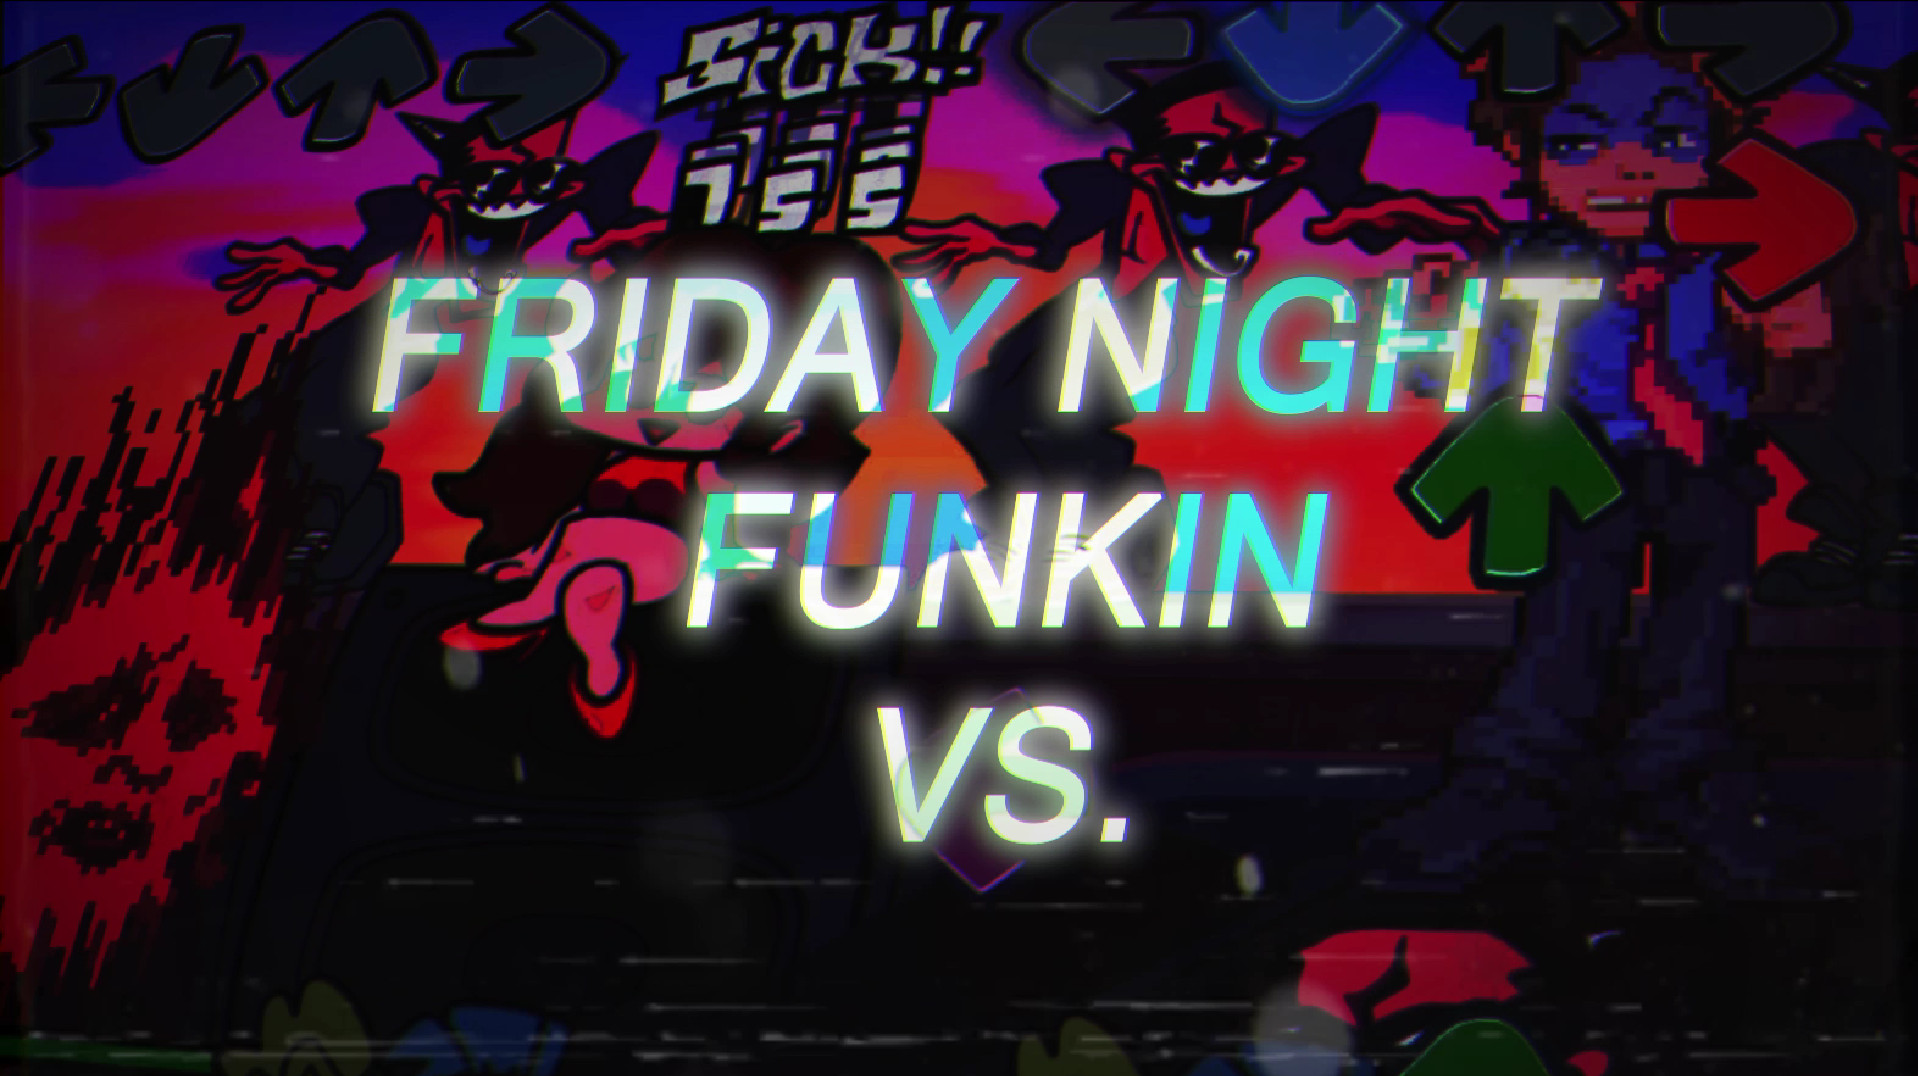 FRIDAY NIGHT FUNKIN' ONLINE VS [HANK UPDATE] by The Blue Hatted